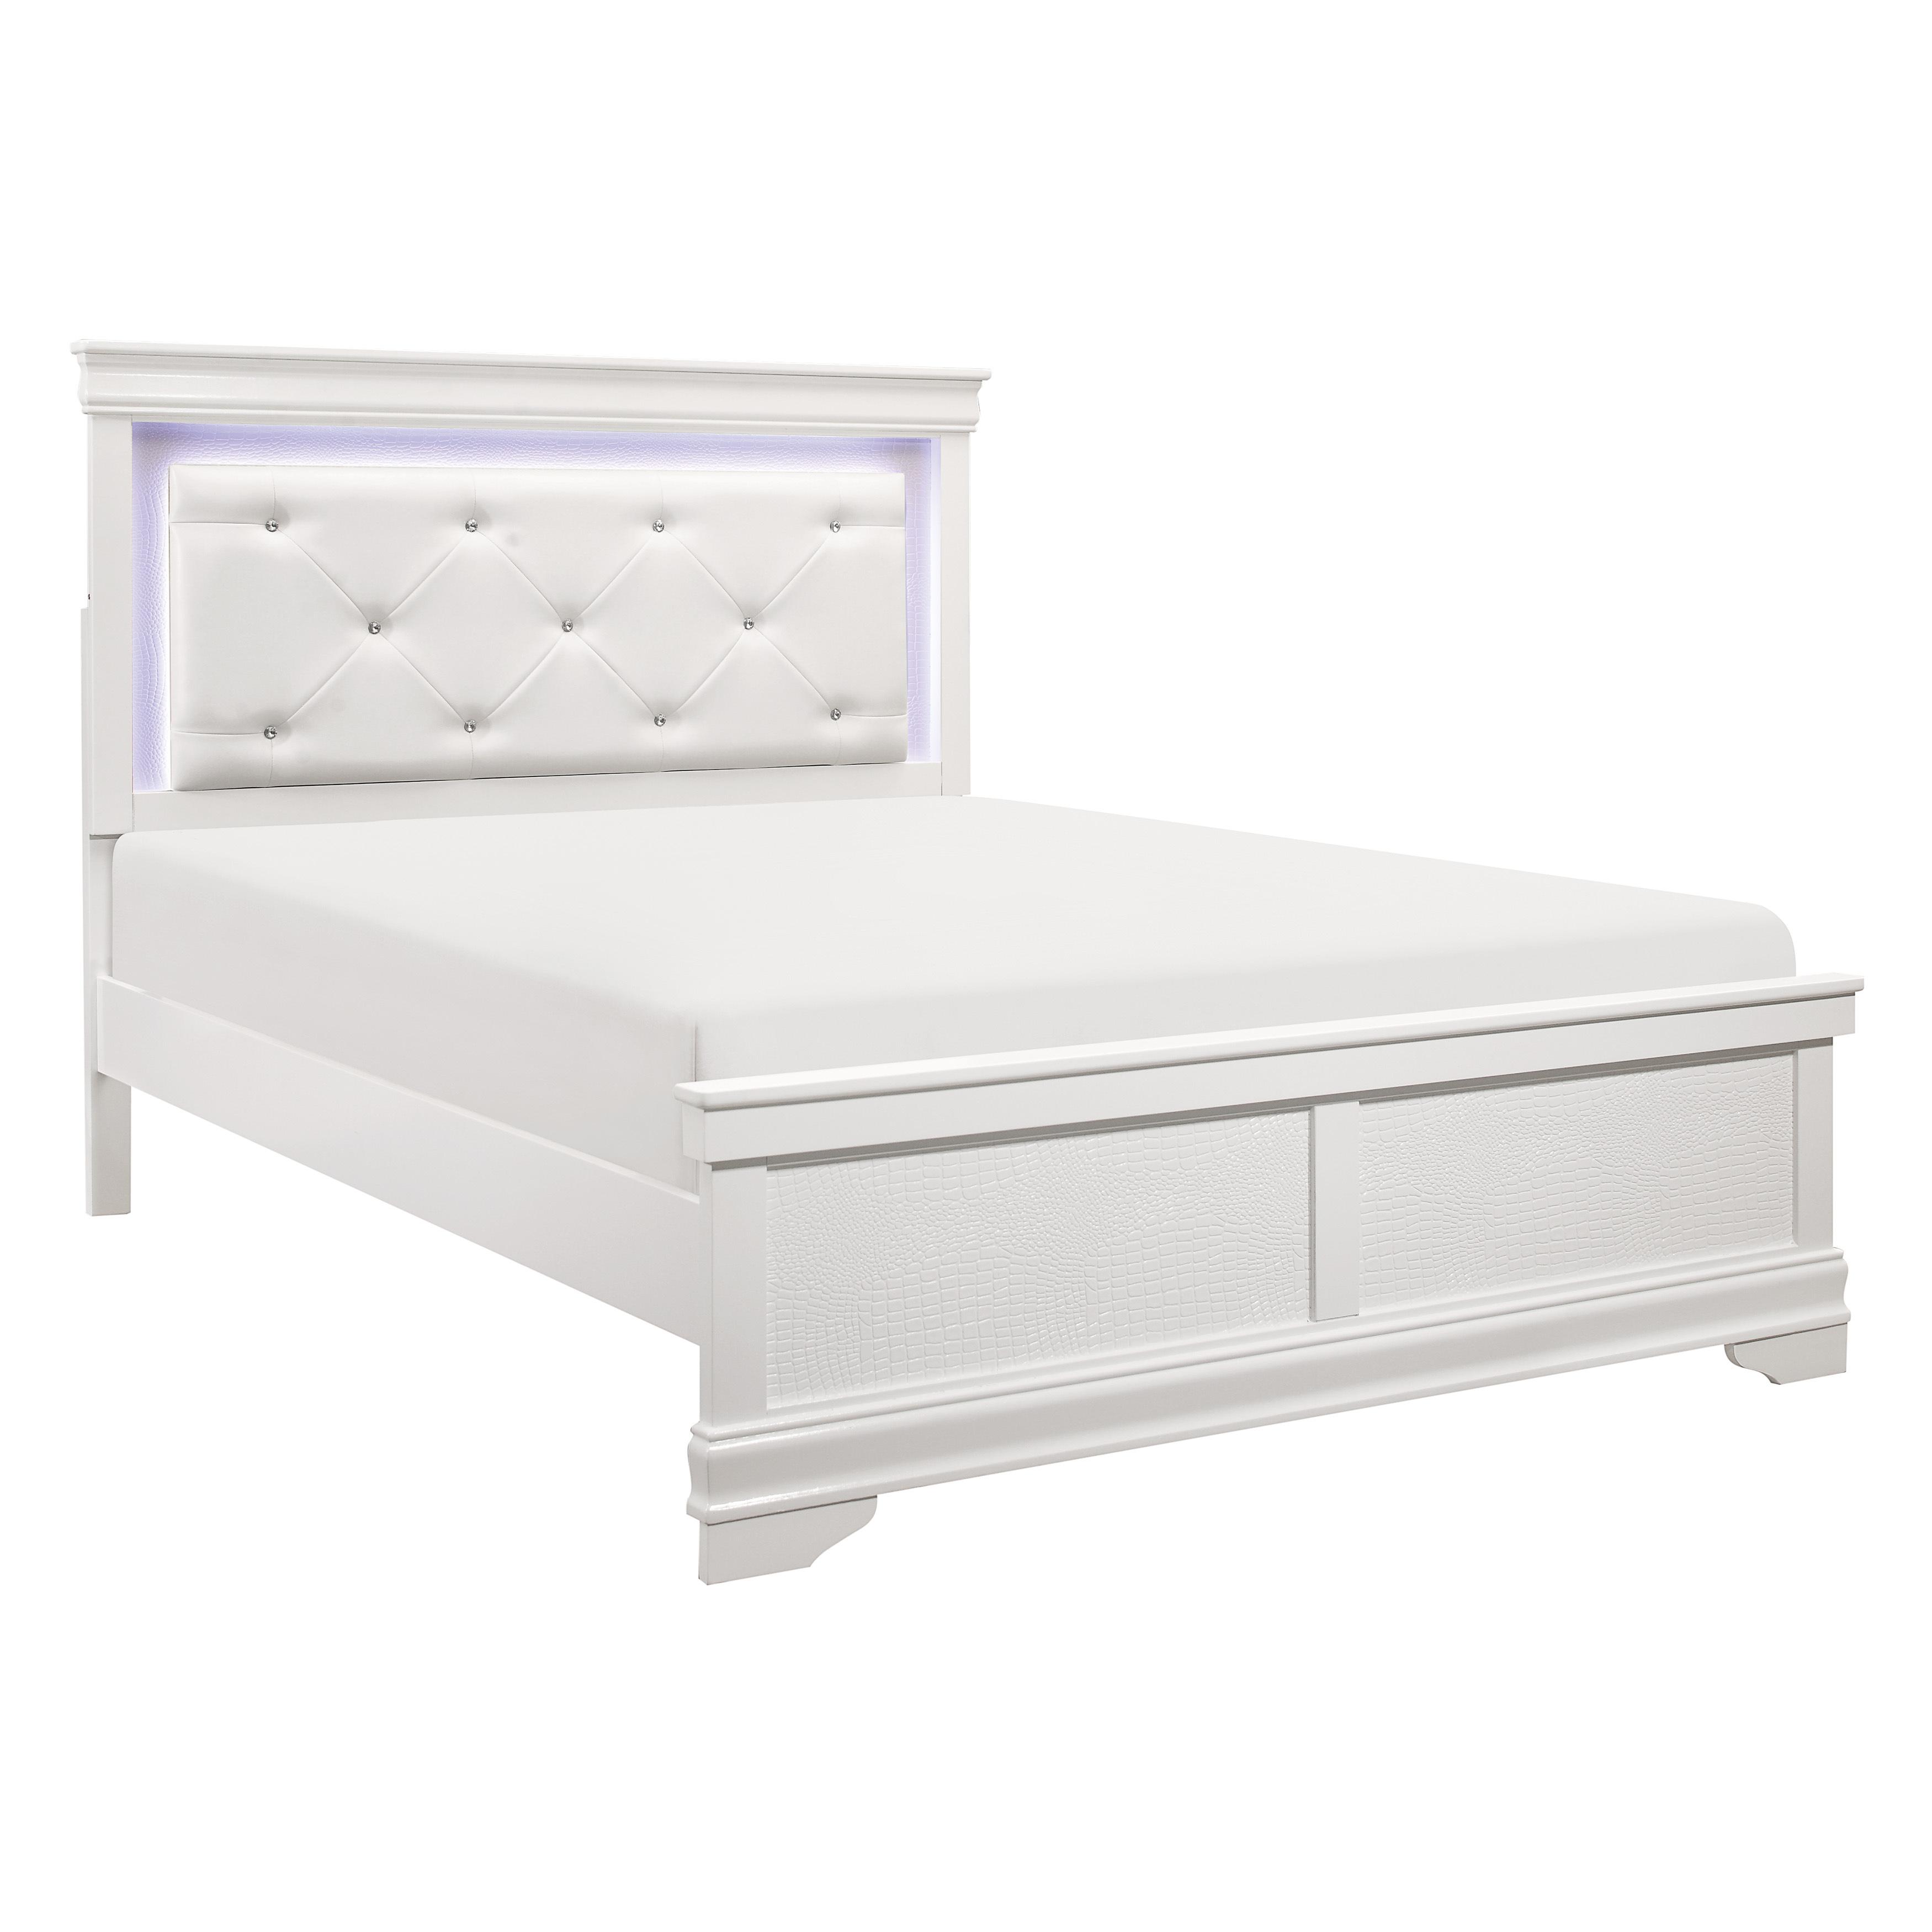 Traditional Bed 1556WK-1CK* Lana 1556WK-1CK* in White Faux Leather